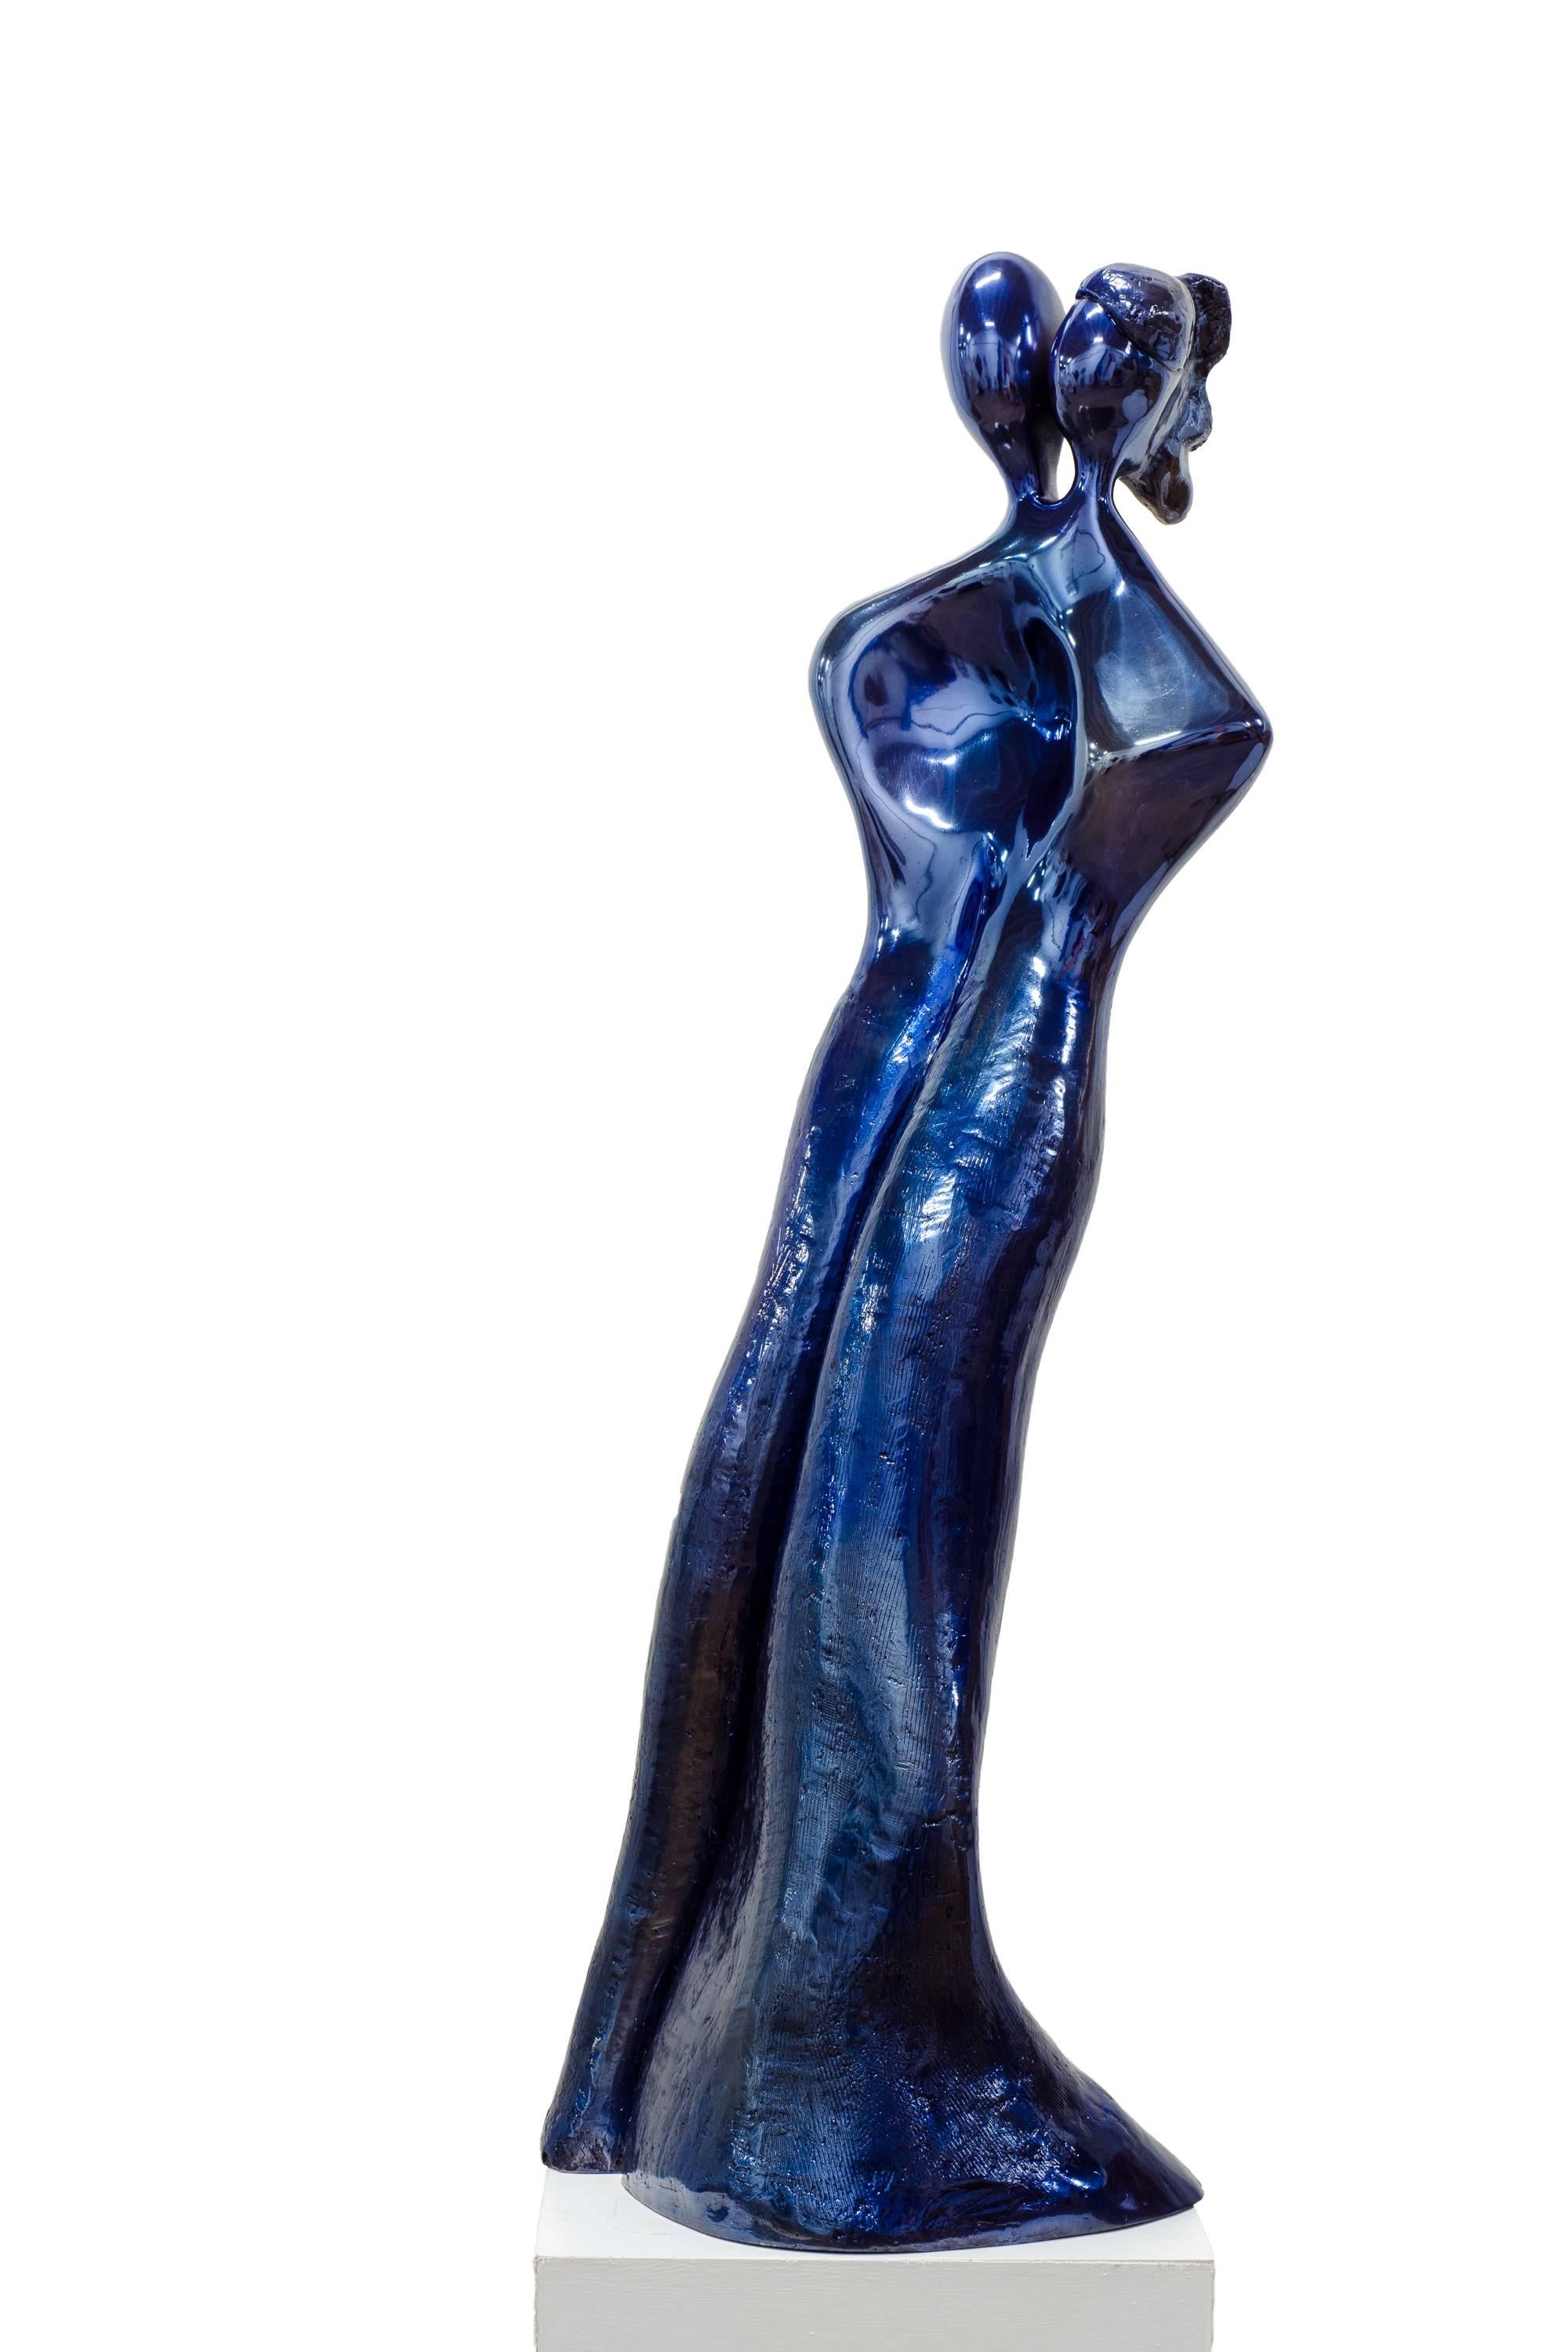 Beatriz Gerenstein Abstract Sculpture - Soulmates #1 (in Blue). When In love, their souls and bodies fuse into just one